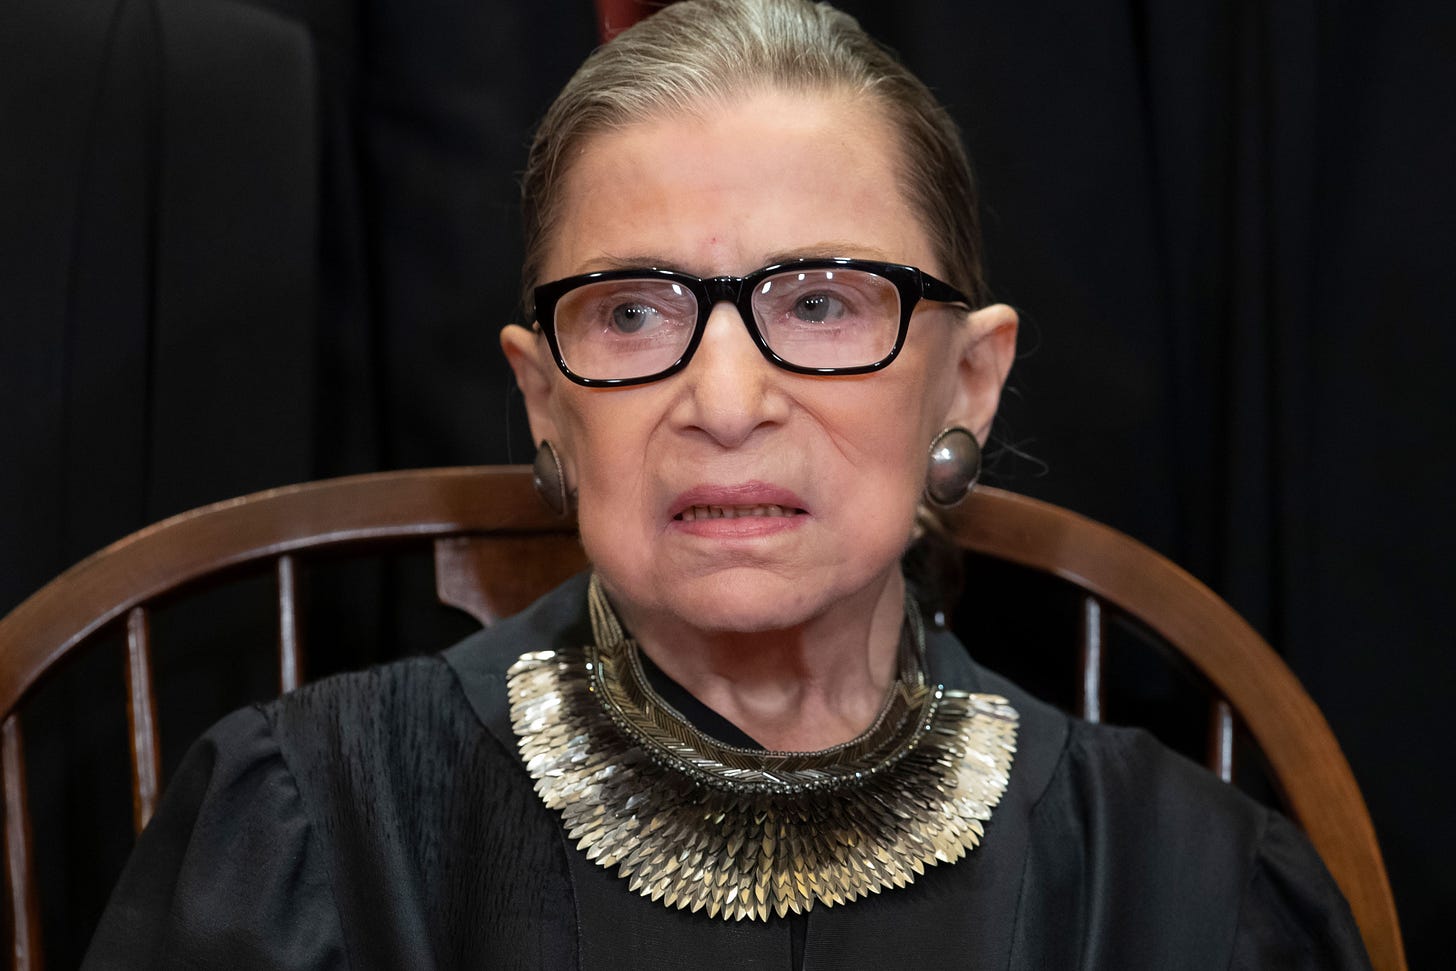 Ruth Bader Ginsburg says she opposes expanding the Supreme Court